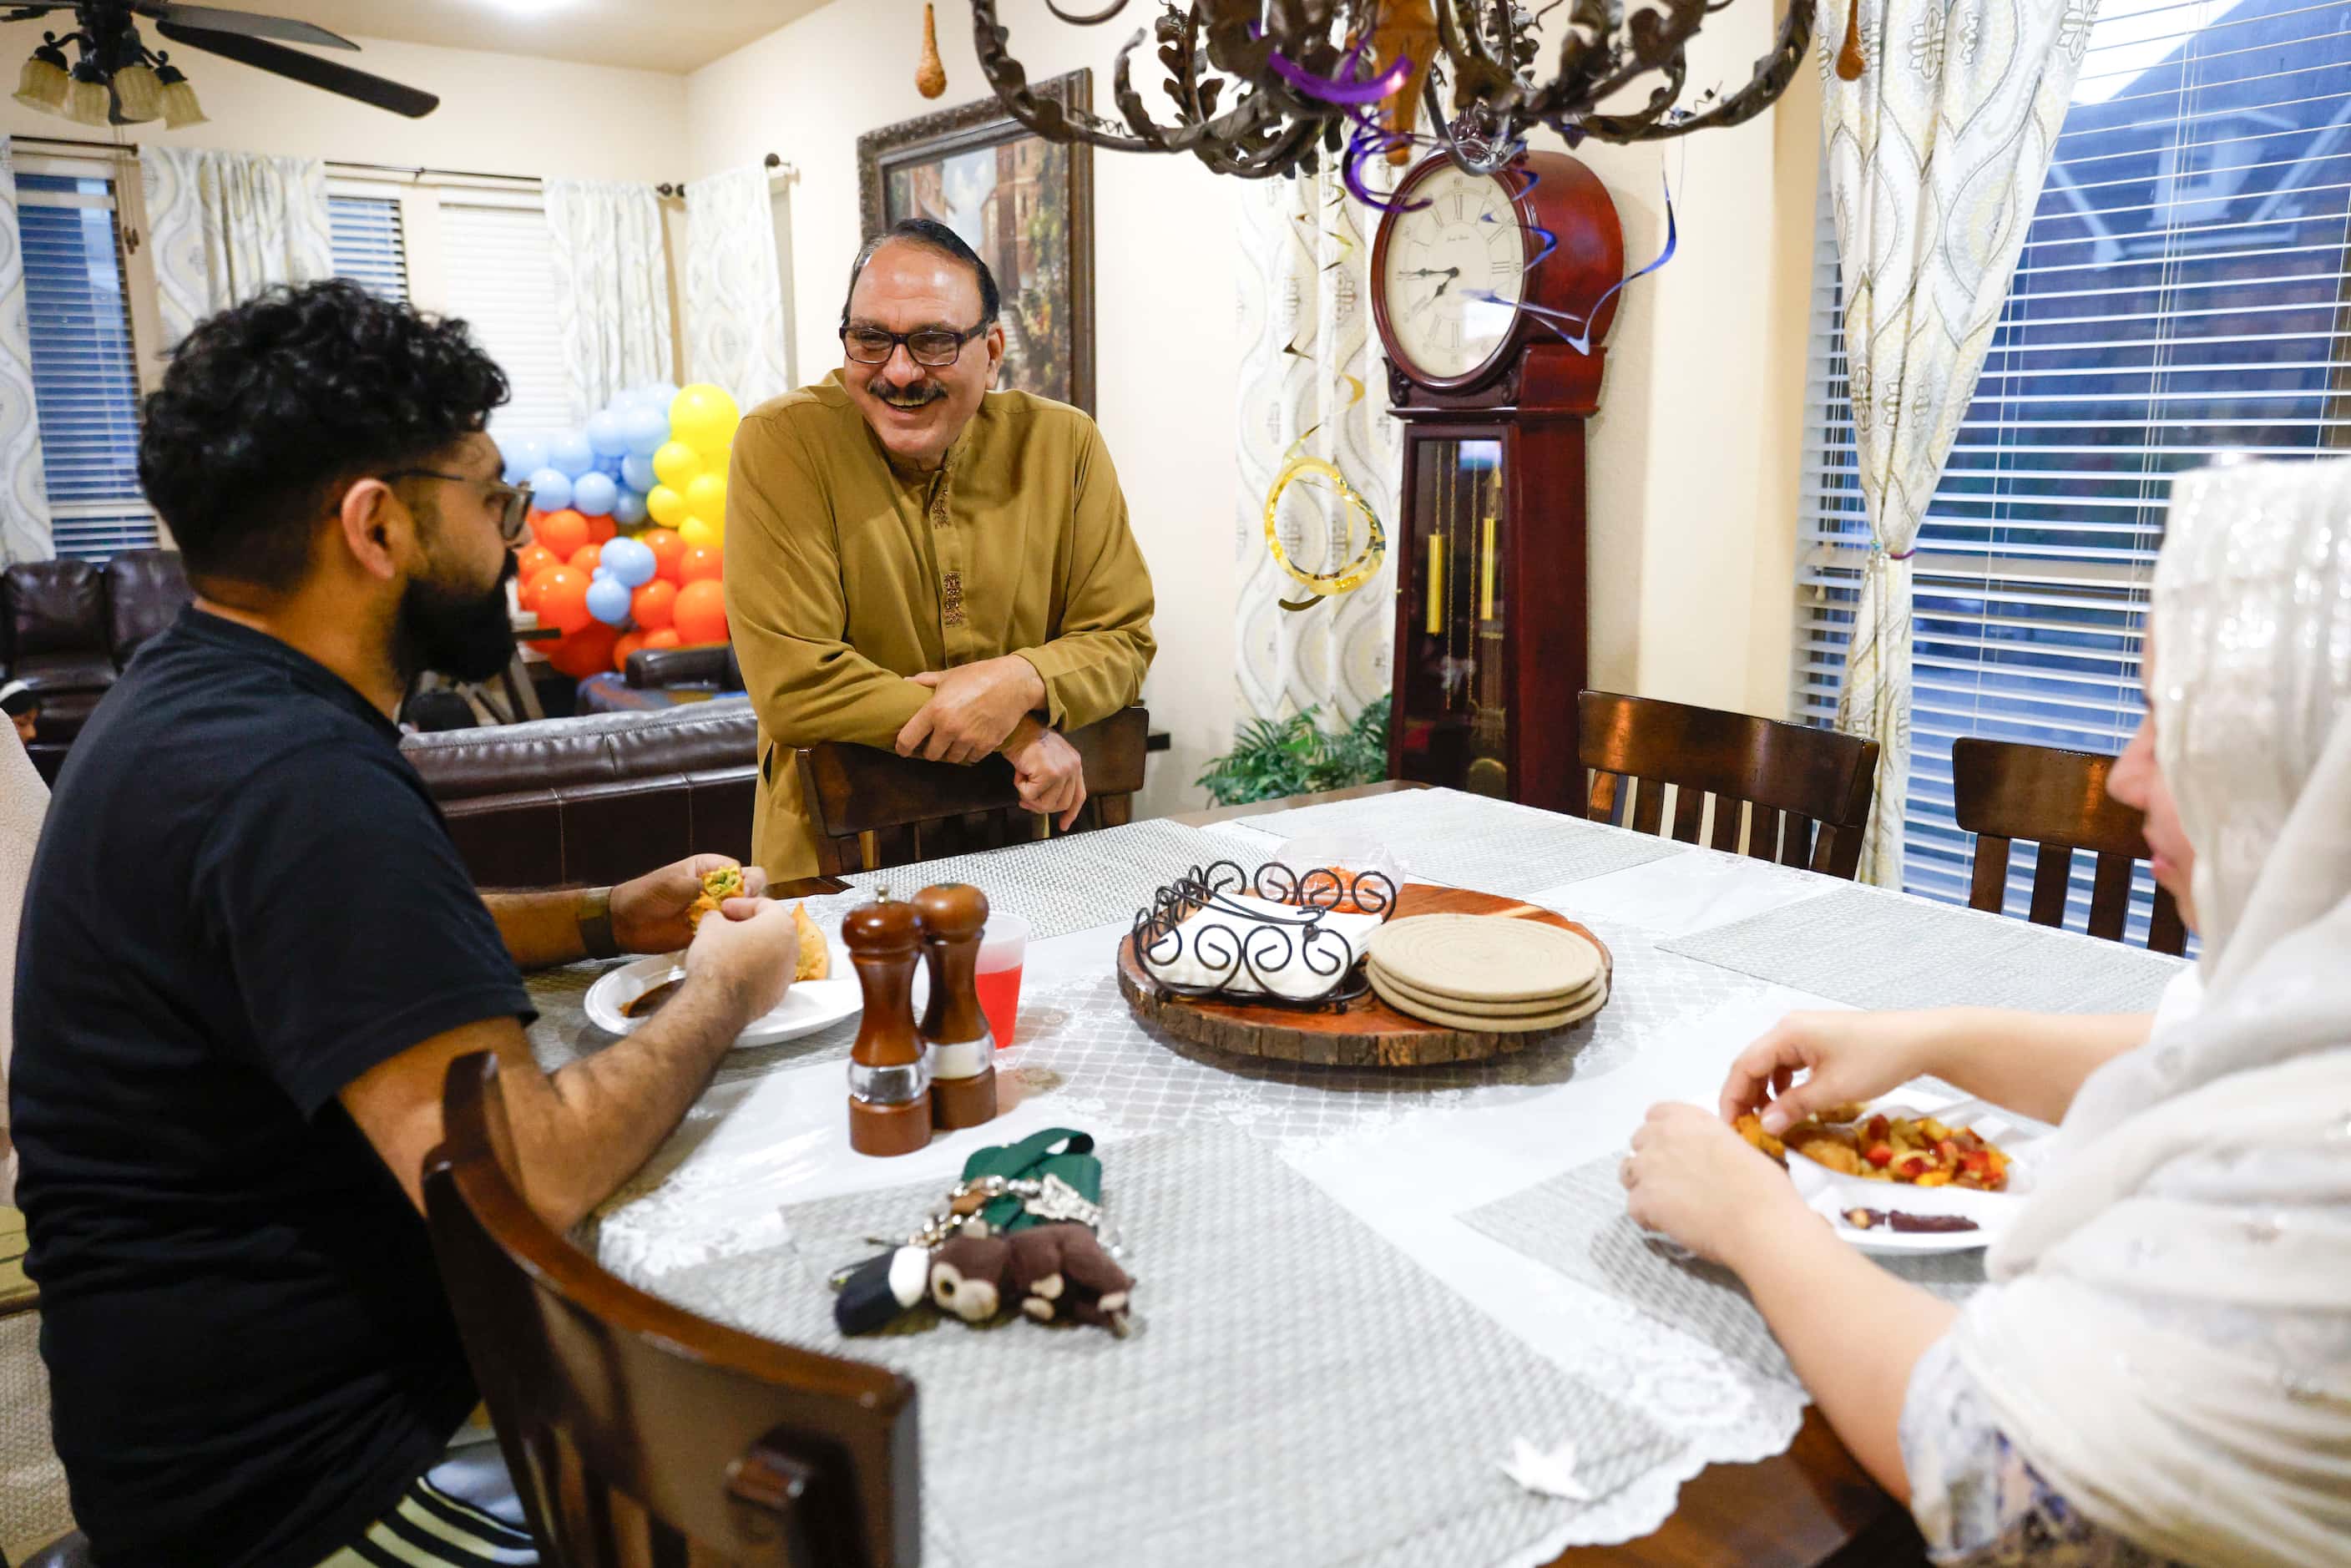 Mohammed Humayoun Butt (center) goes around the Iftar table during a family gathering on,...